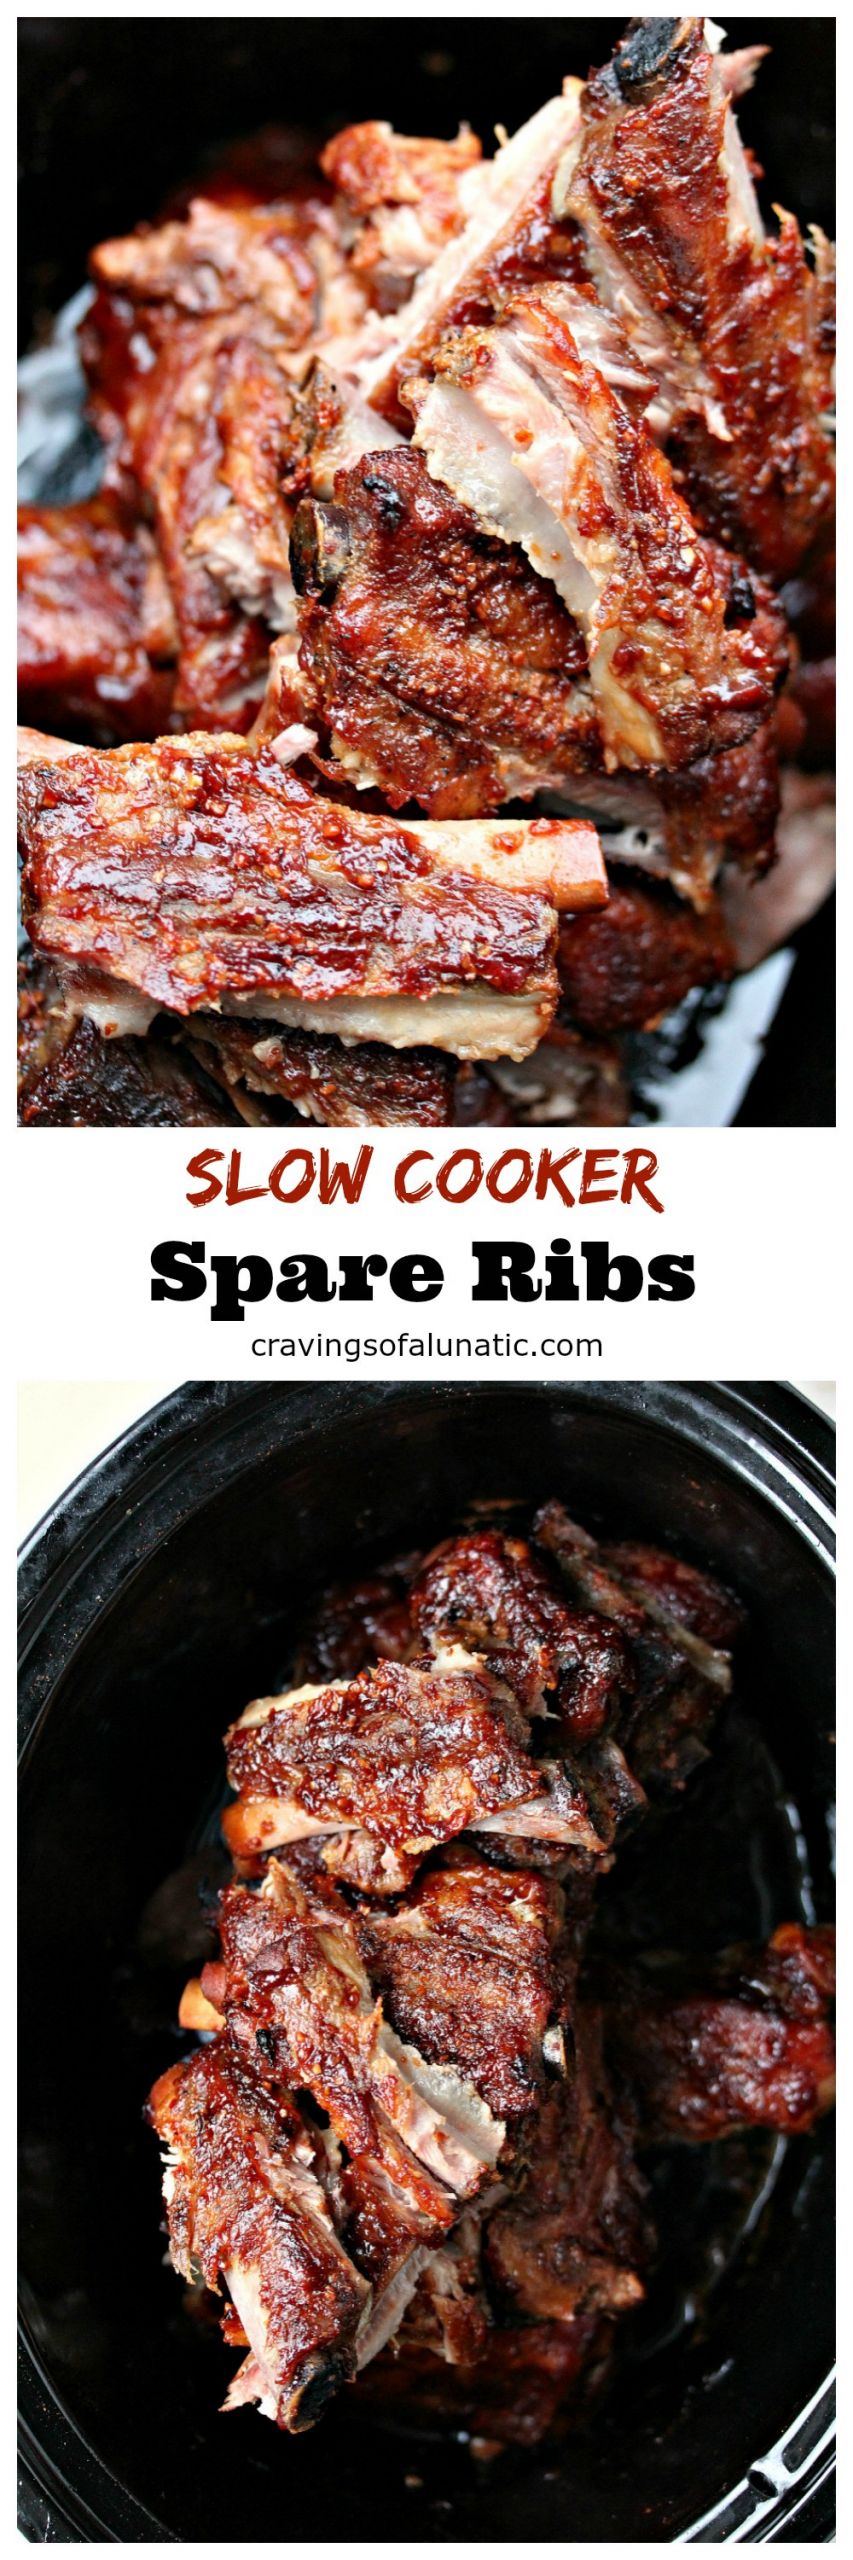 Pork Spare Ribs Slow Cooker Recipe
 Slow Cooker Spare Ribs